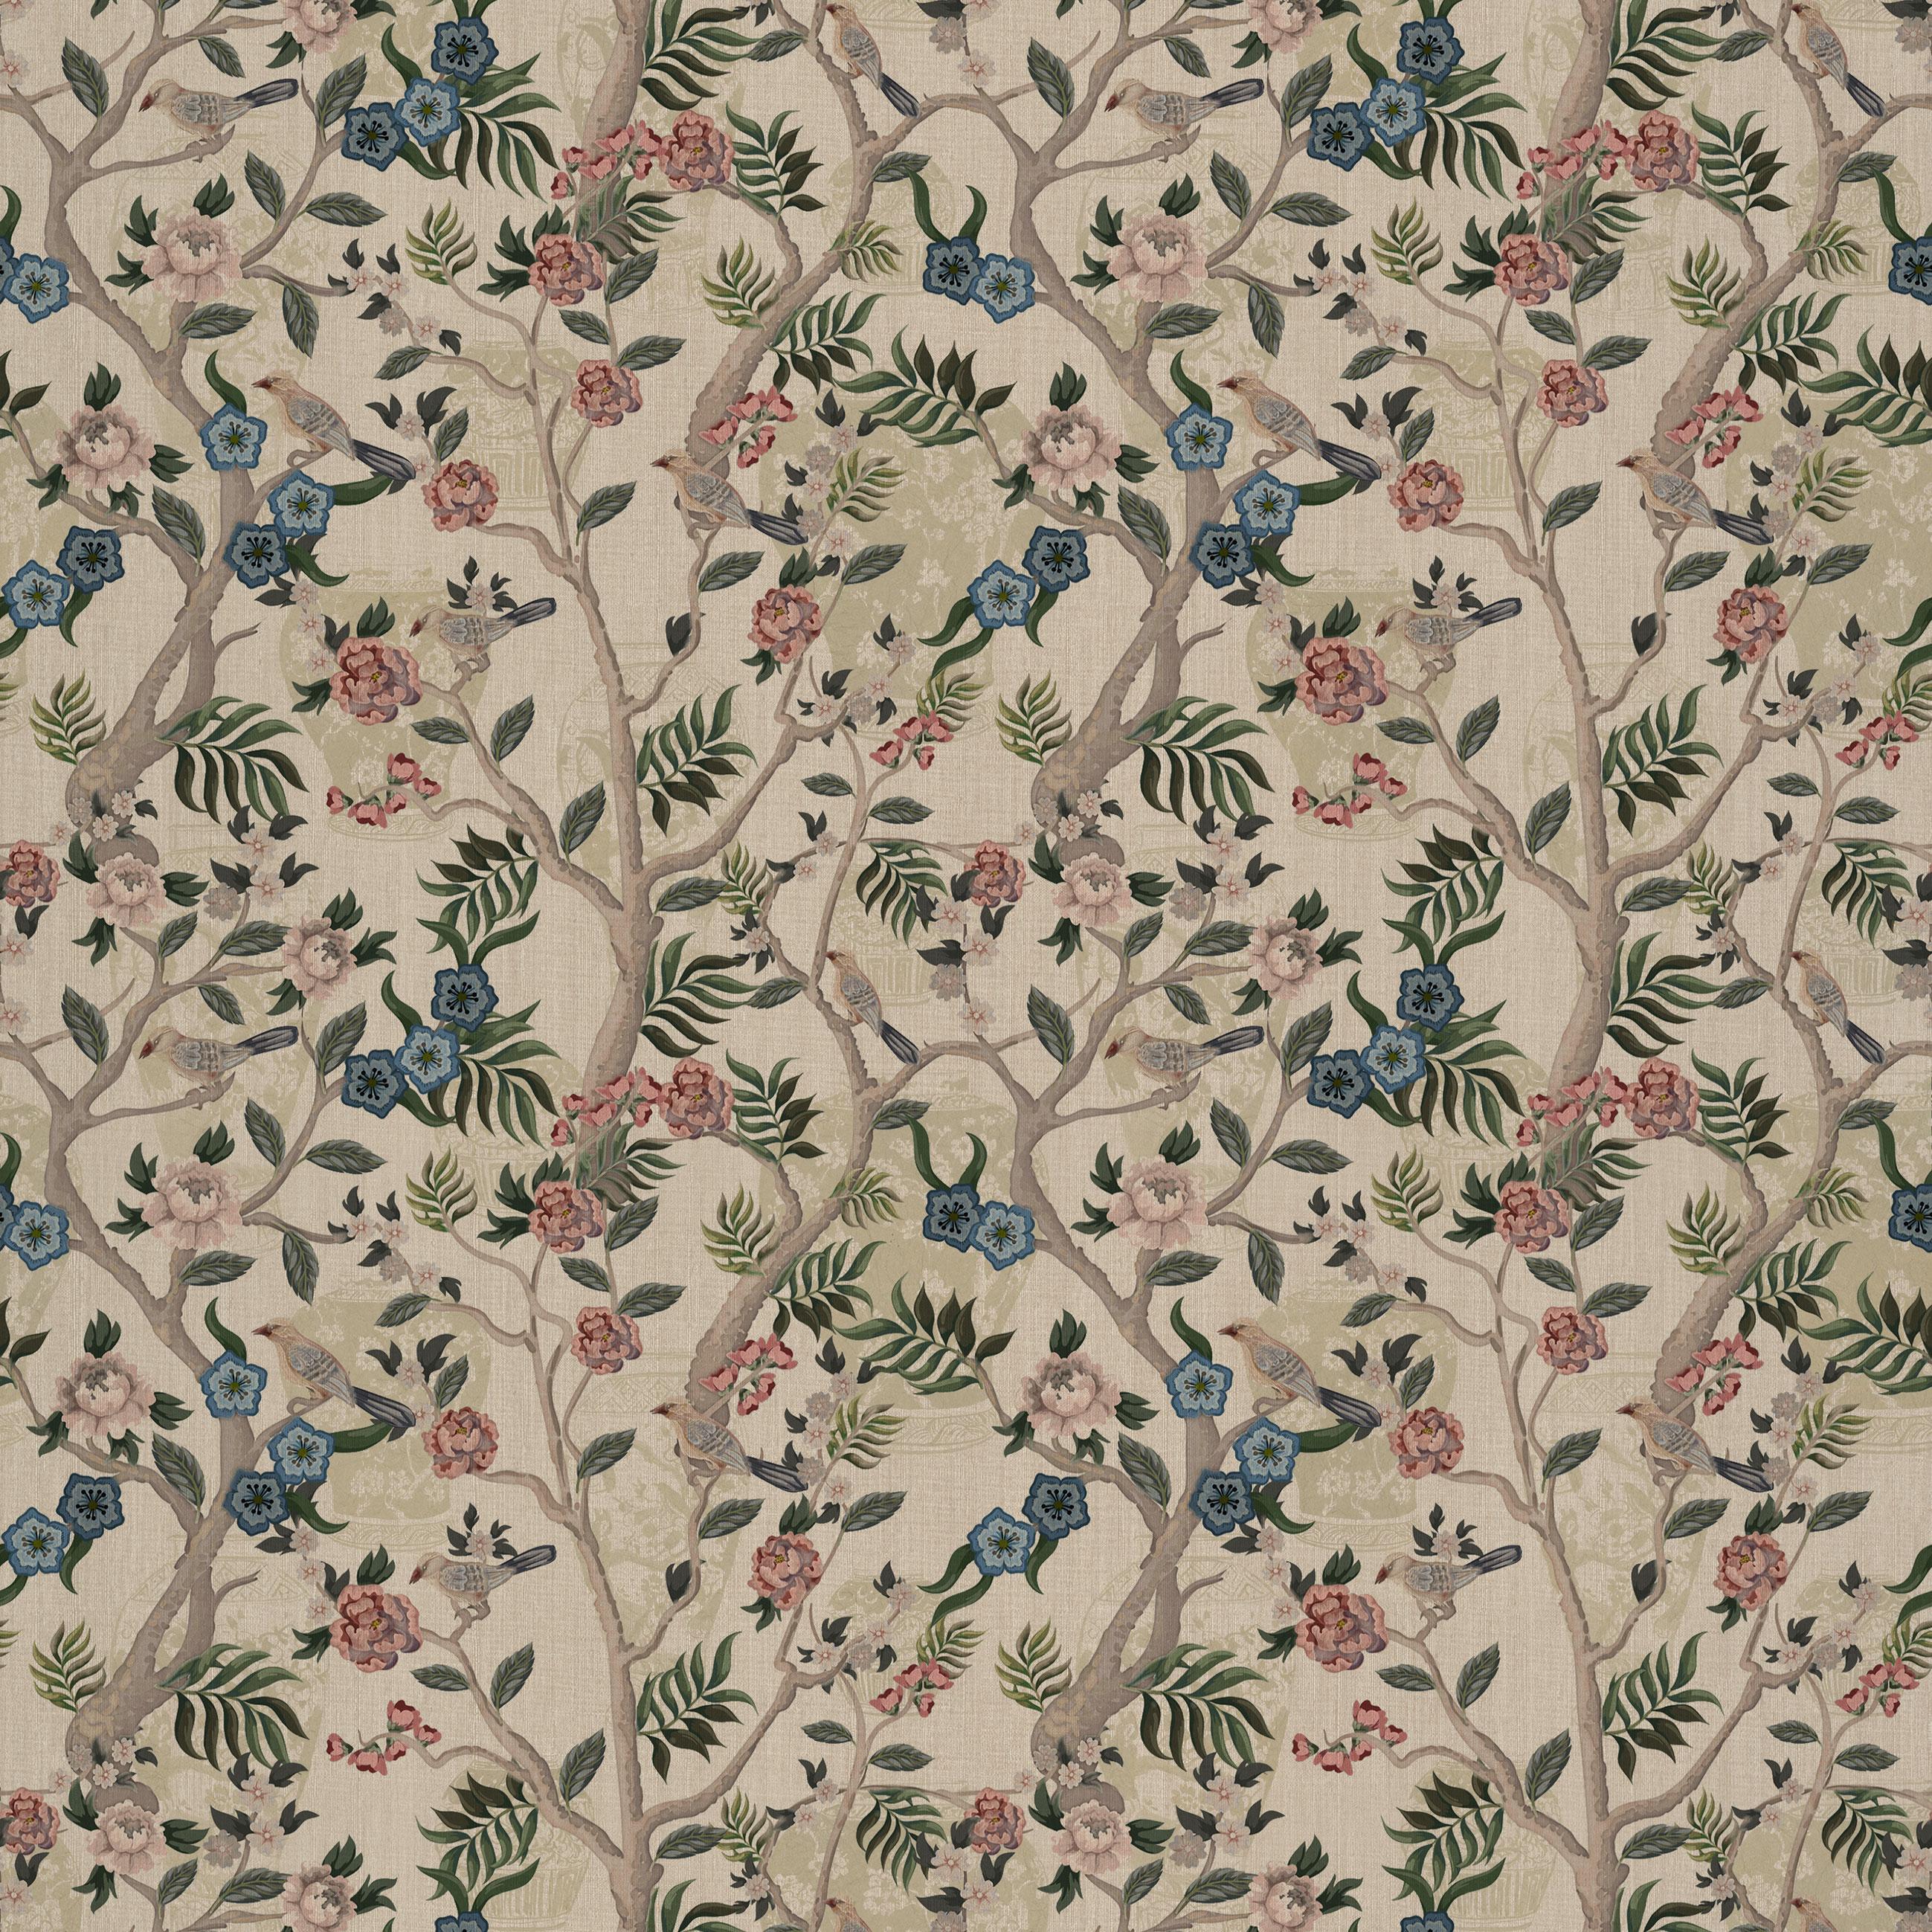 Paper Ornami Pattern Blossoms Chinoiserie Vinyl Wallpaper Made in Italy Digital Print For Sale